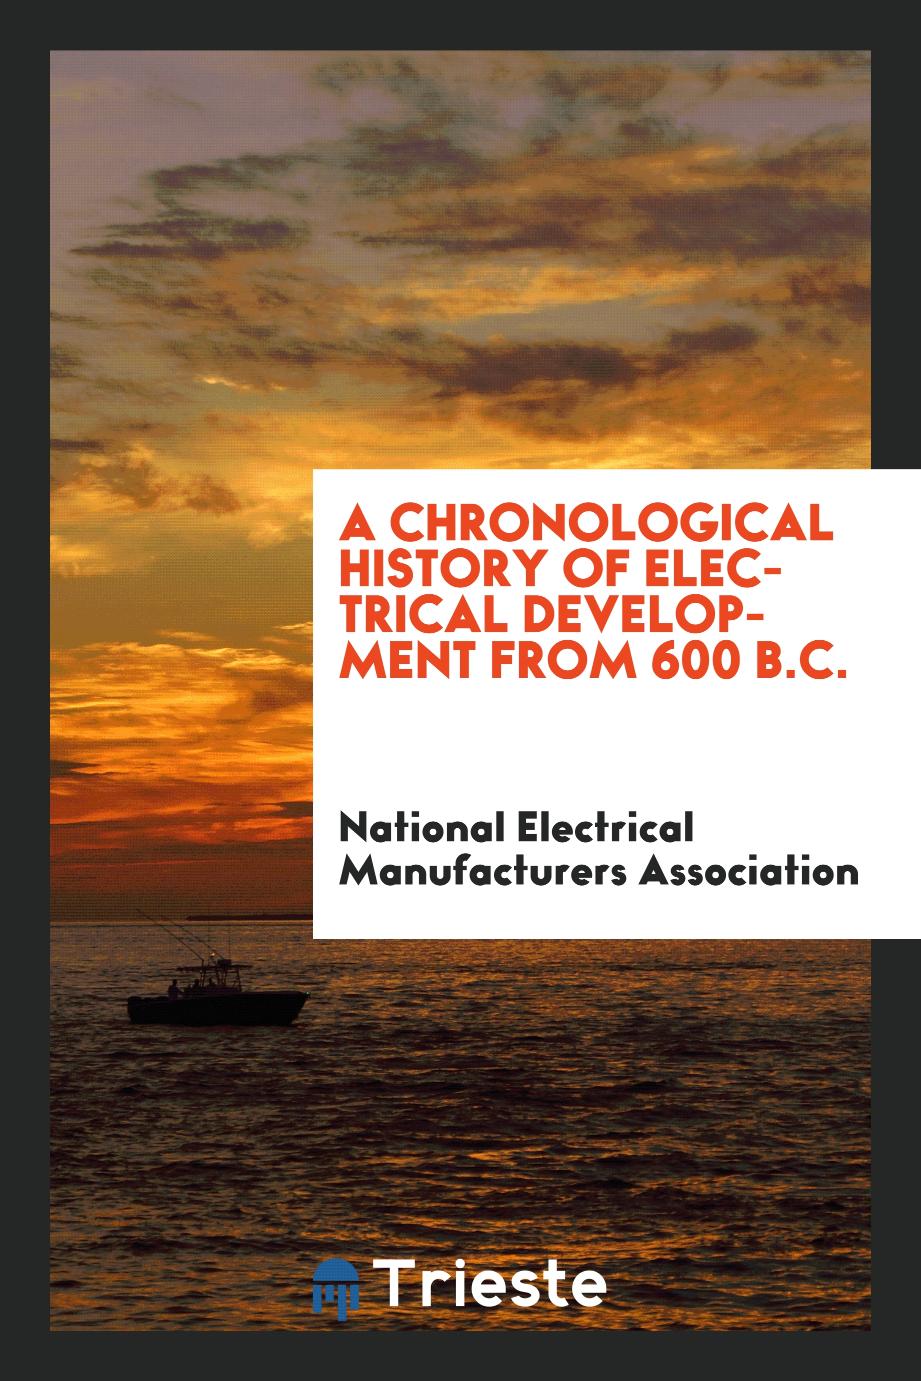 A chronological history of electrical development from 600 B.C.